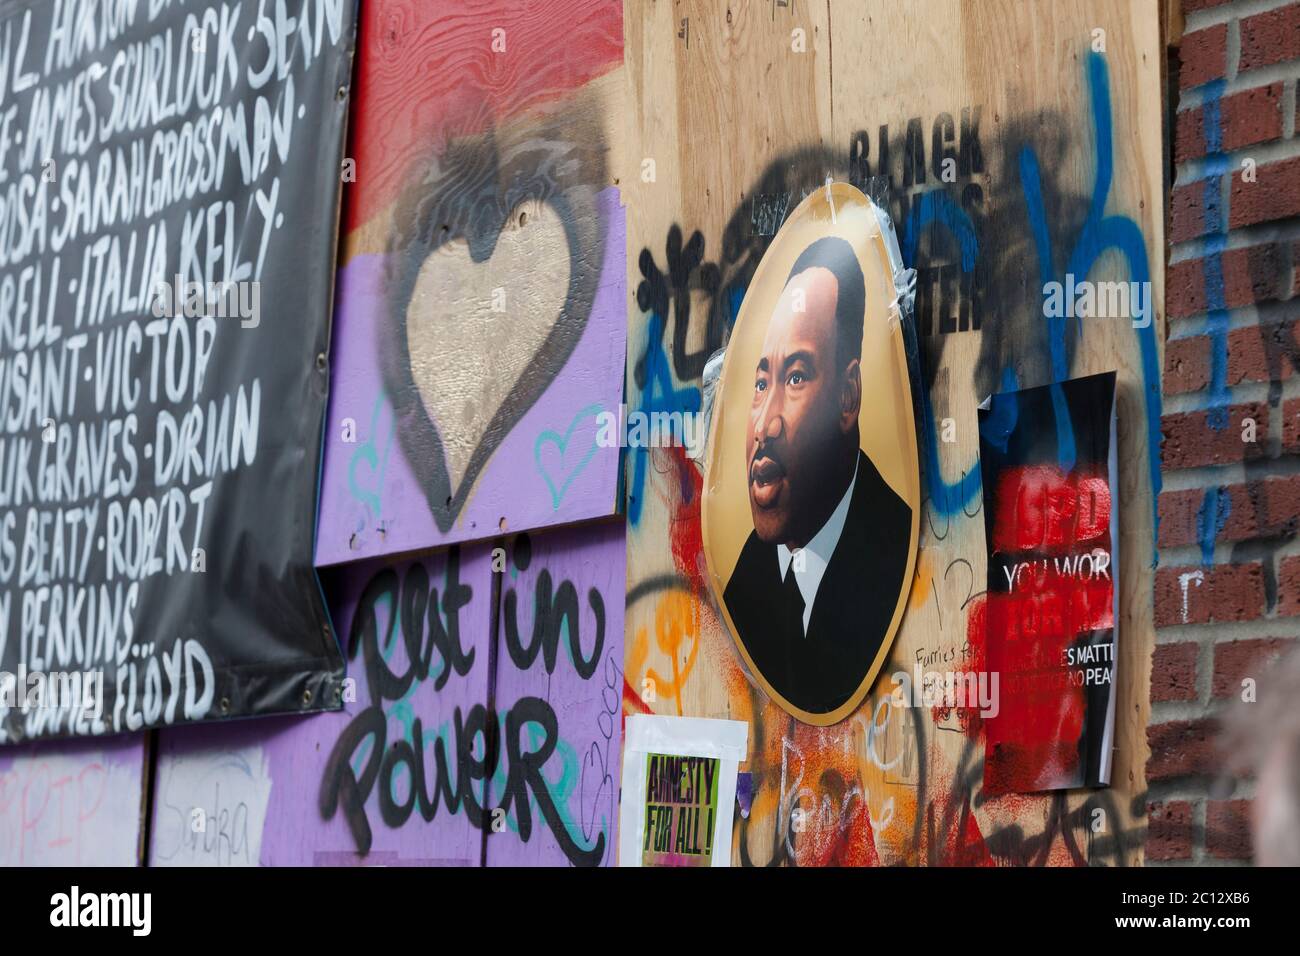 An image of Martin Luther King Jr. adorns a growing shrine to George Floyd in the “Capitol Hill Autonomous Zone” in Seattle on Friday, June 12, 2020. The zone, also known as CHAZ, is a self-declared intentional community and commune established when the Seattle Police Department closed the East Precinct after days of large protests and occasional violent clashes. Stock Photo